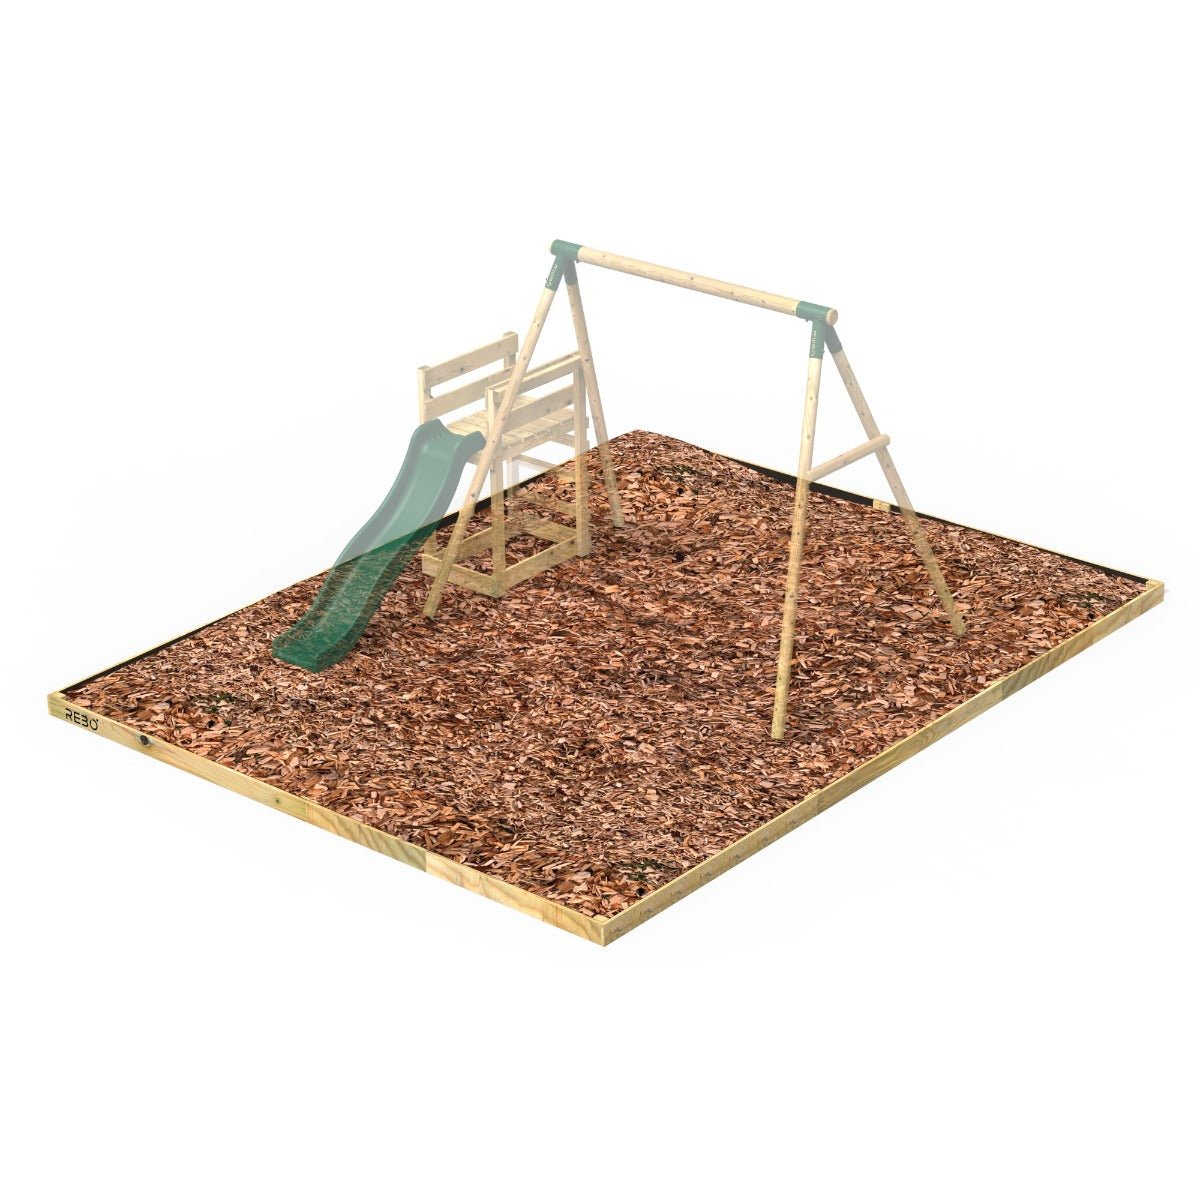 Rebo Safety Play Area Protective Bark Wood Chip Kit - 4M x 5.1M